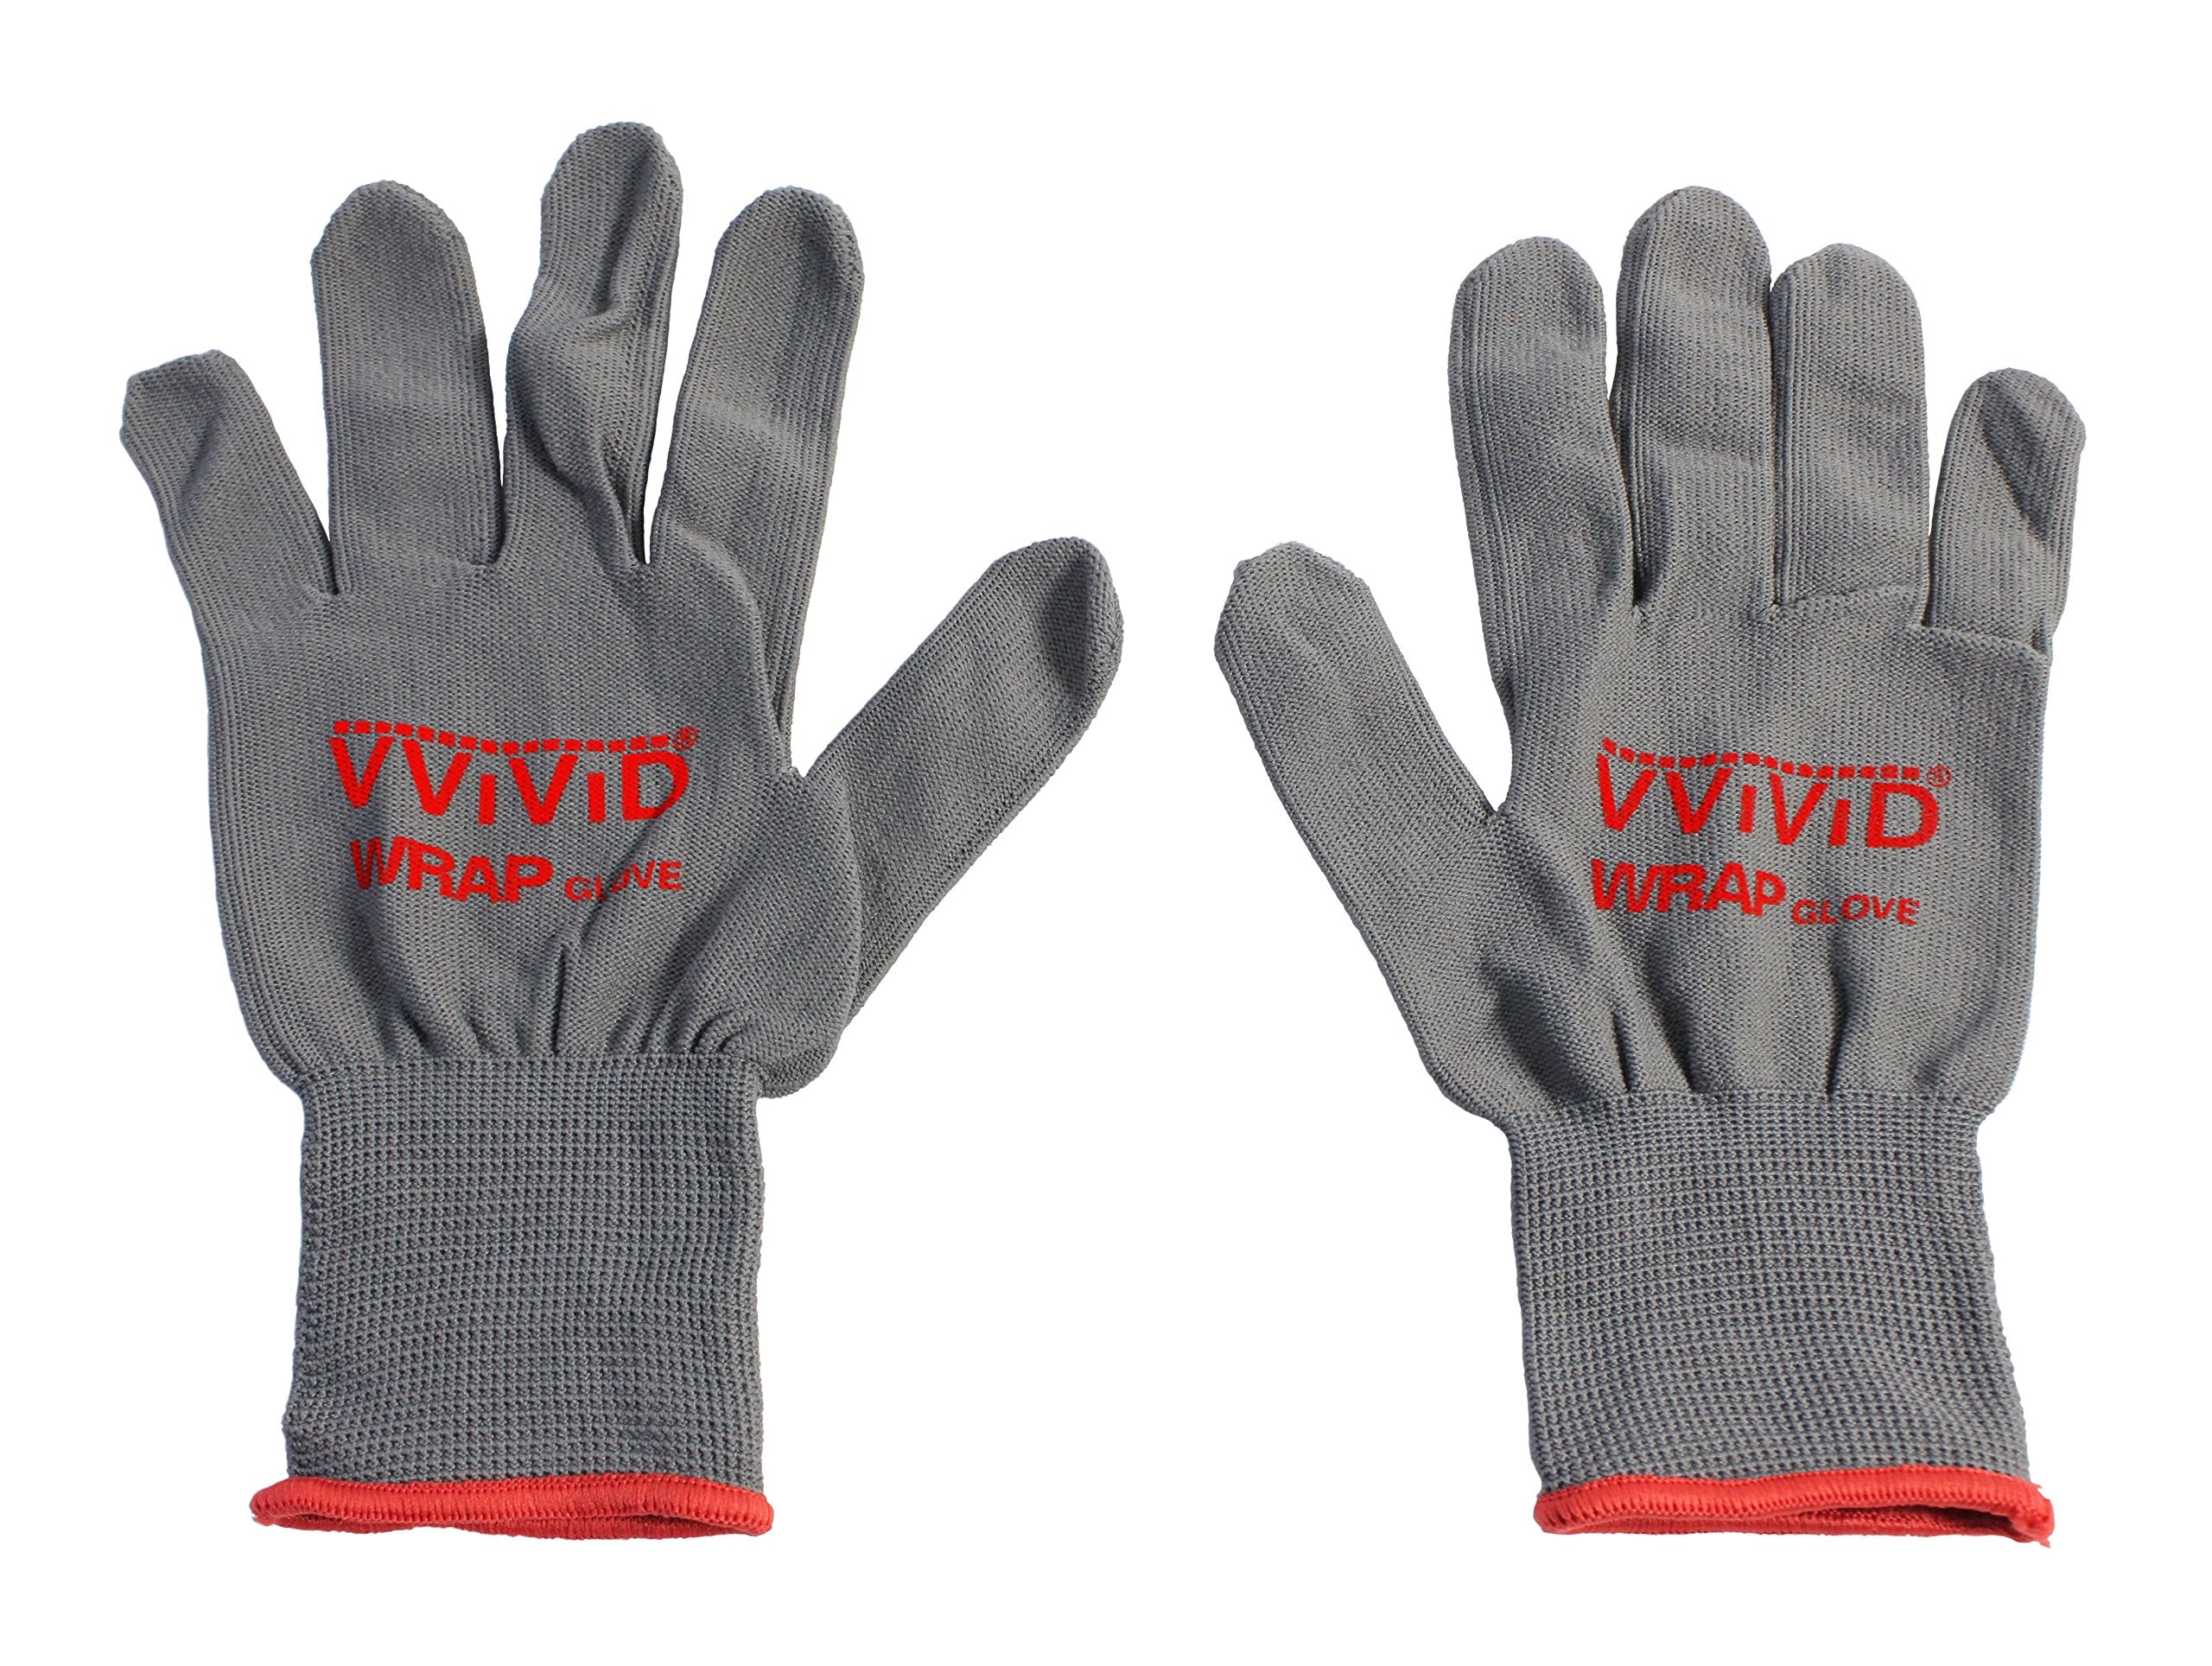 VViViD Vinyl Wrap Application Gloves, Touch Screen Safe - Lint-Free (3 Pairs)